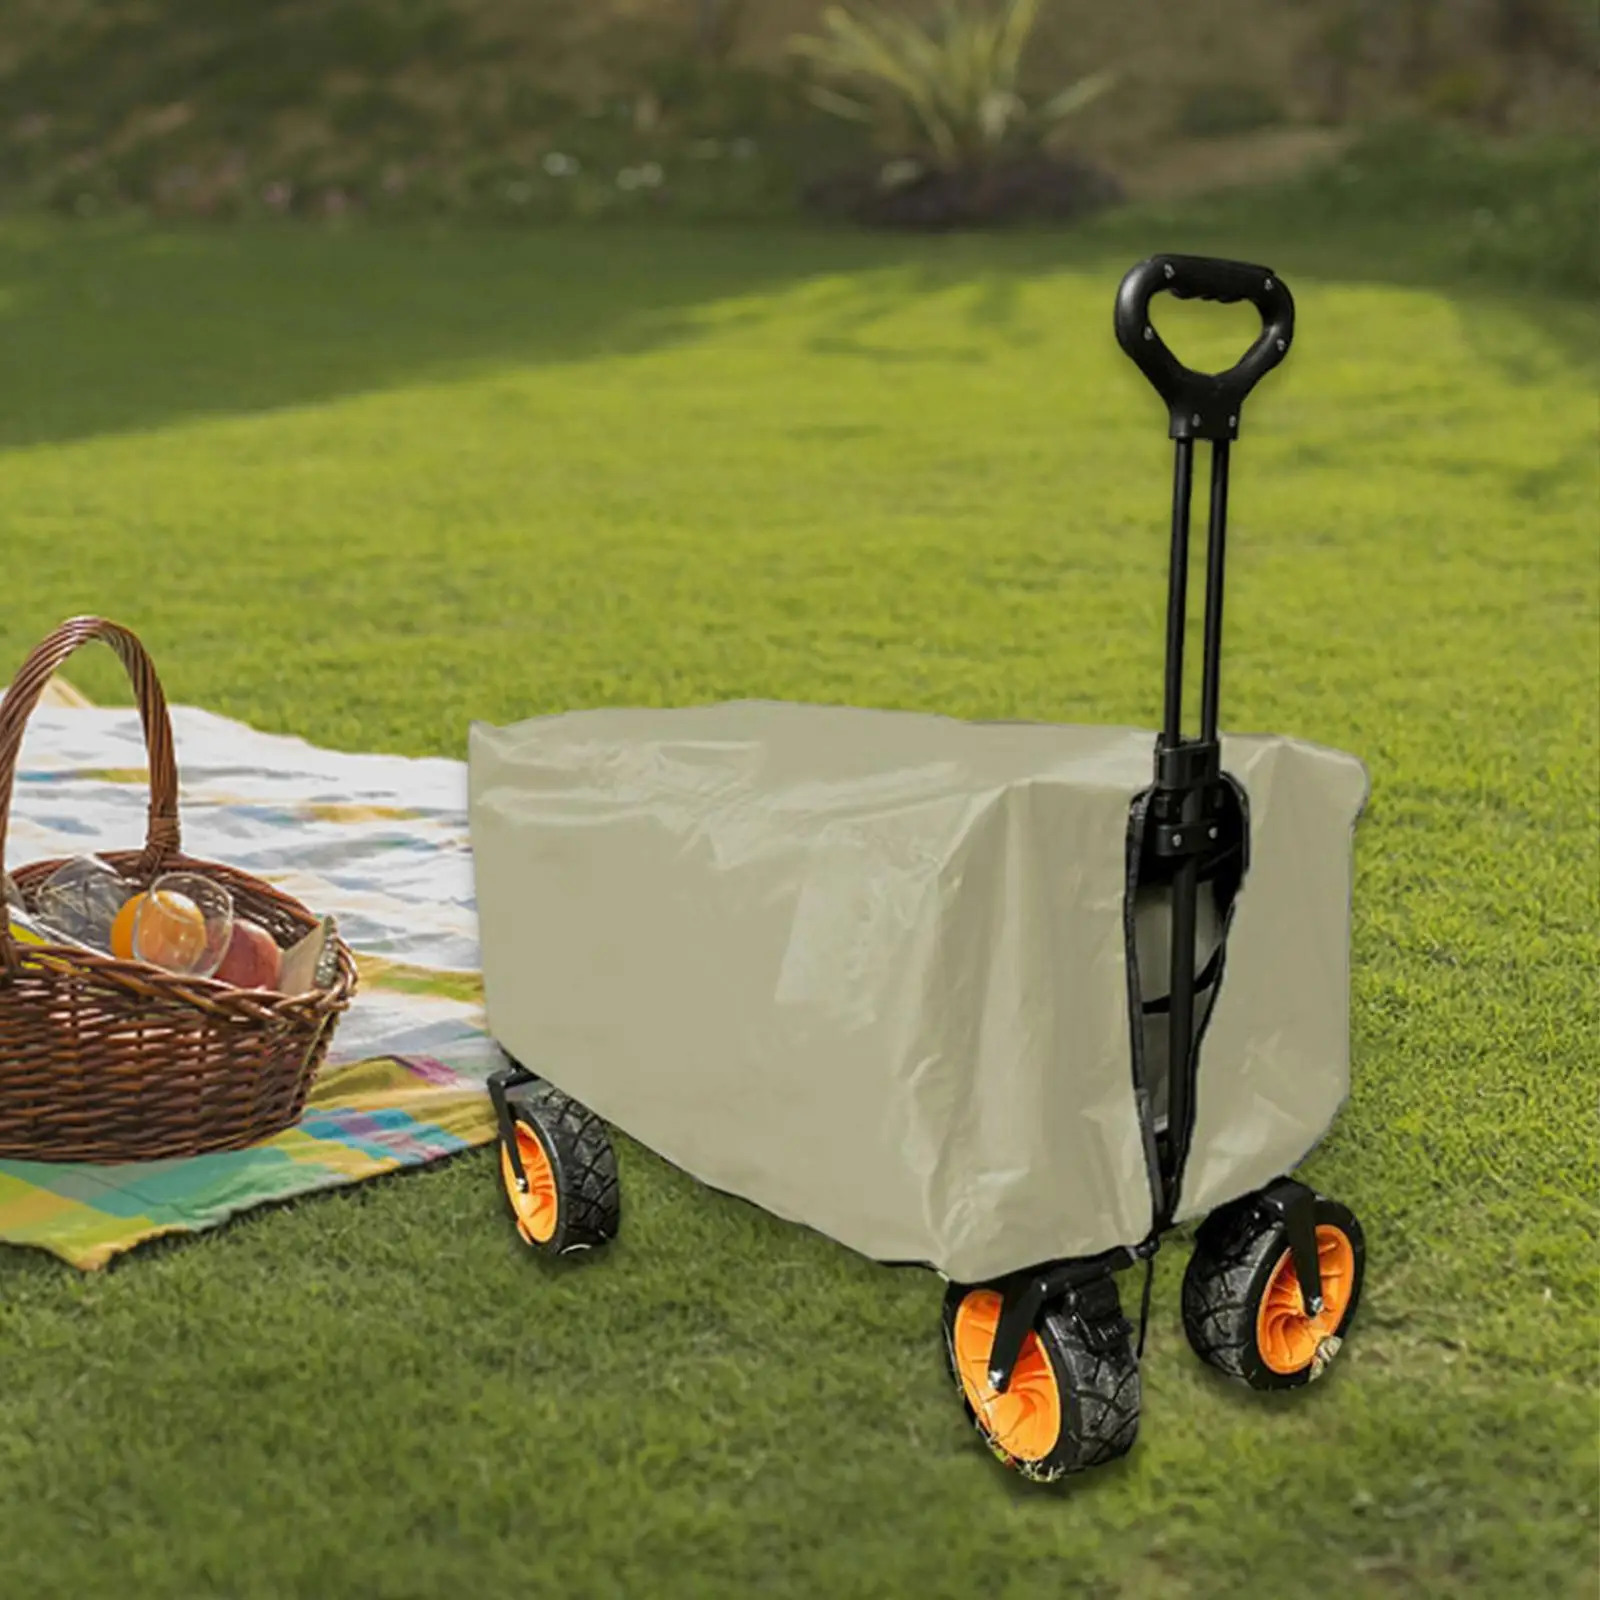 Outdoor Folding Wagon Cover Protective Cover Waterproof 90x50x45cm Sturdy Tear Resistant Oxford Fabric